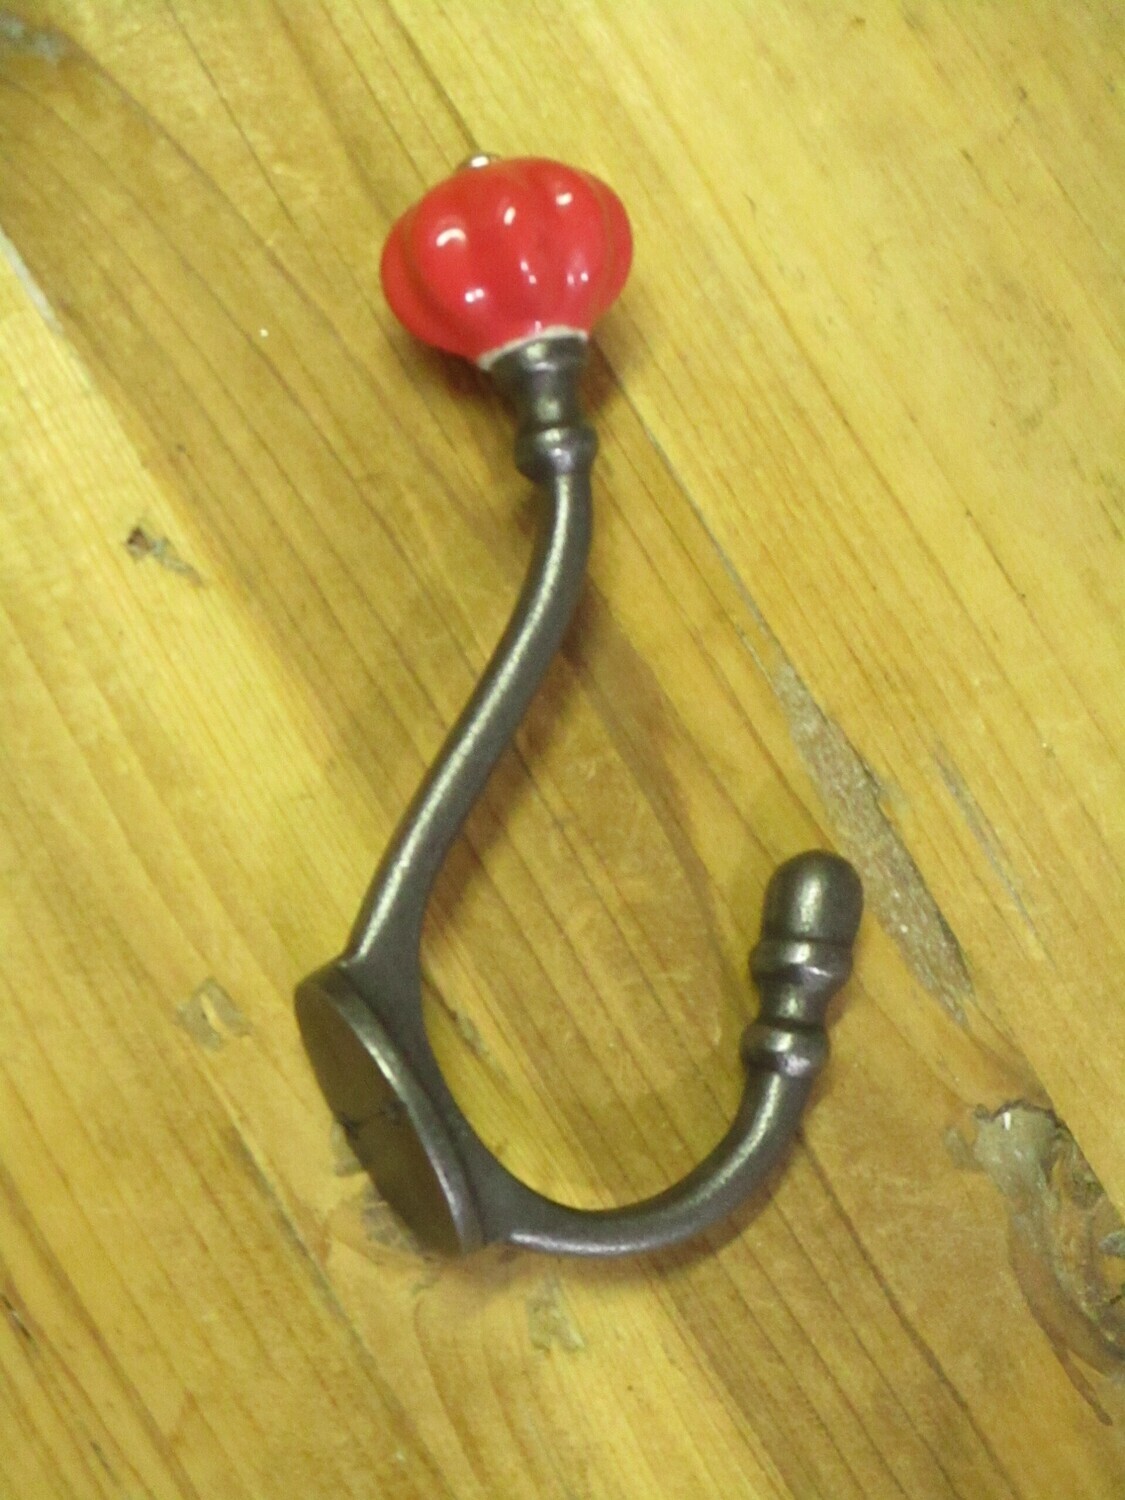 CAST IRON PUMPKIN STYLE HOOK - RED COLORED KNOB